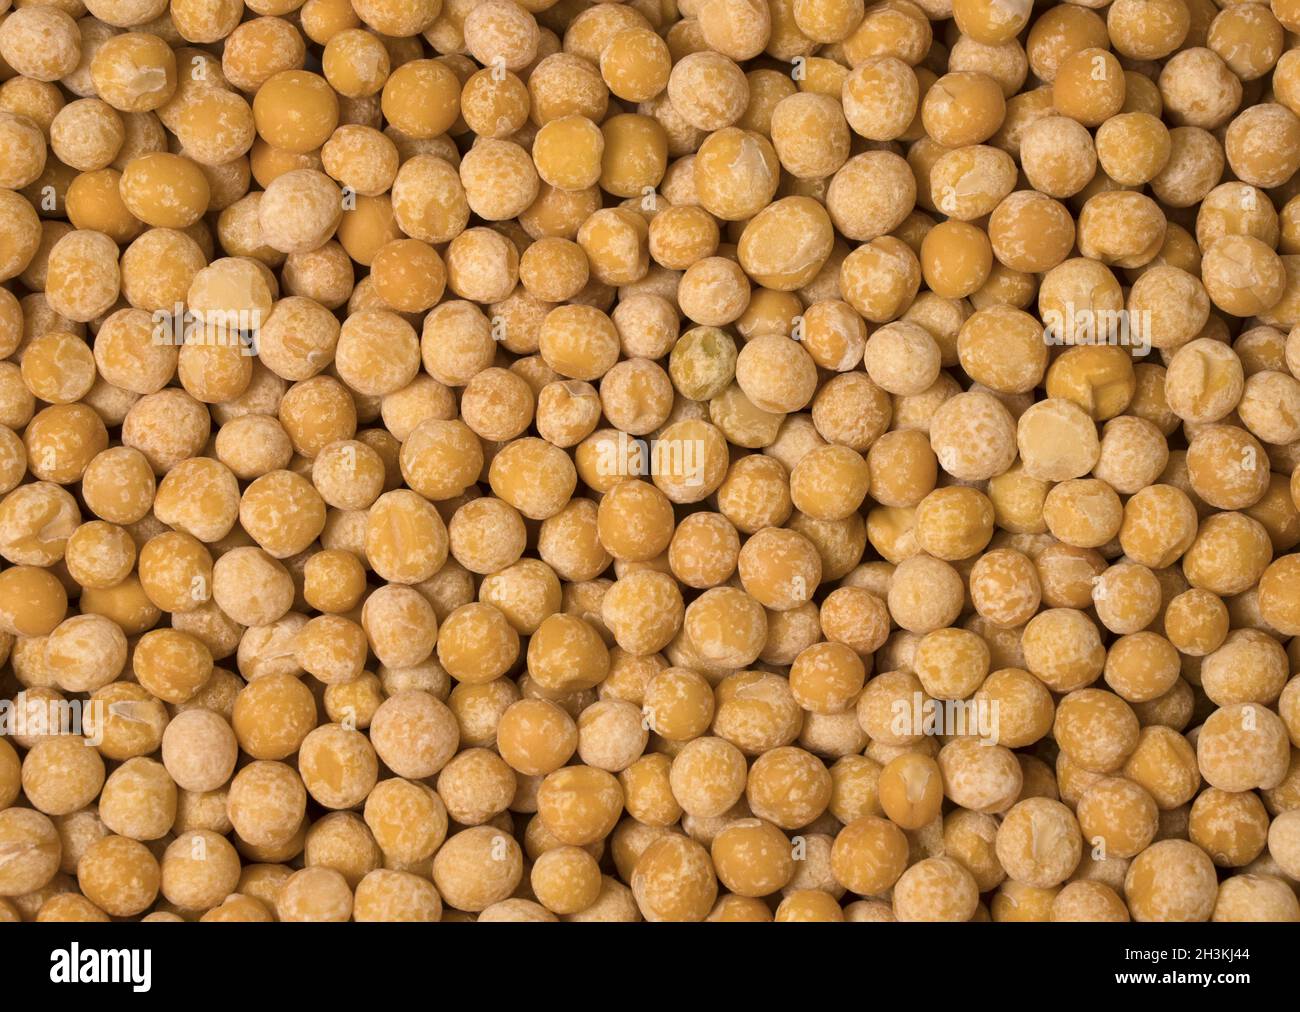 Yellow dry peas as background, close up view. Stock Photo